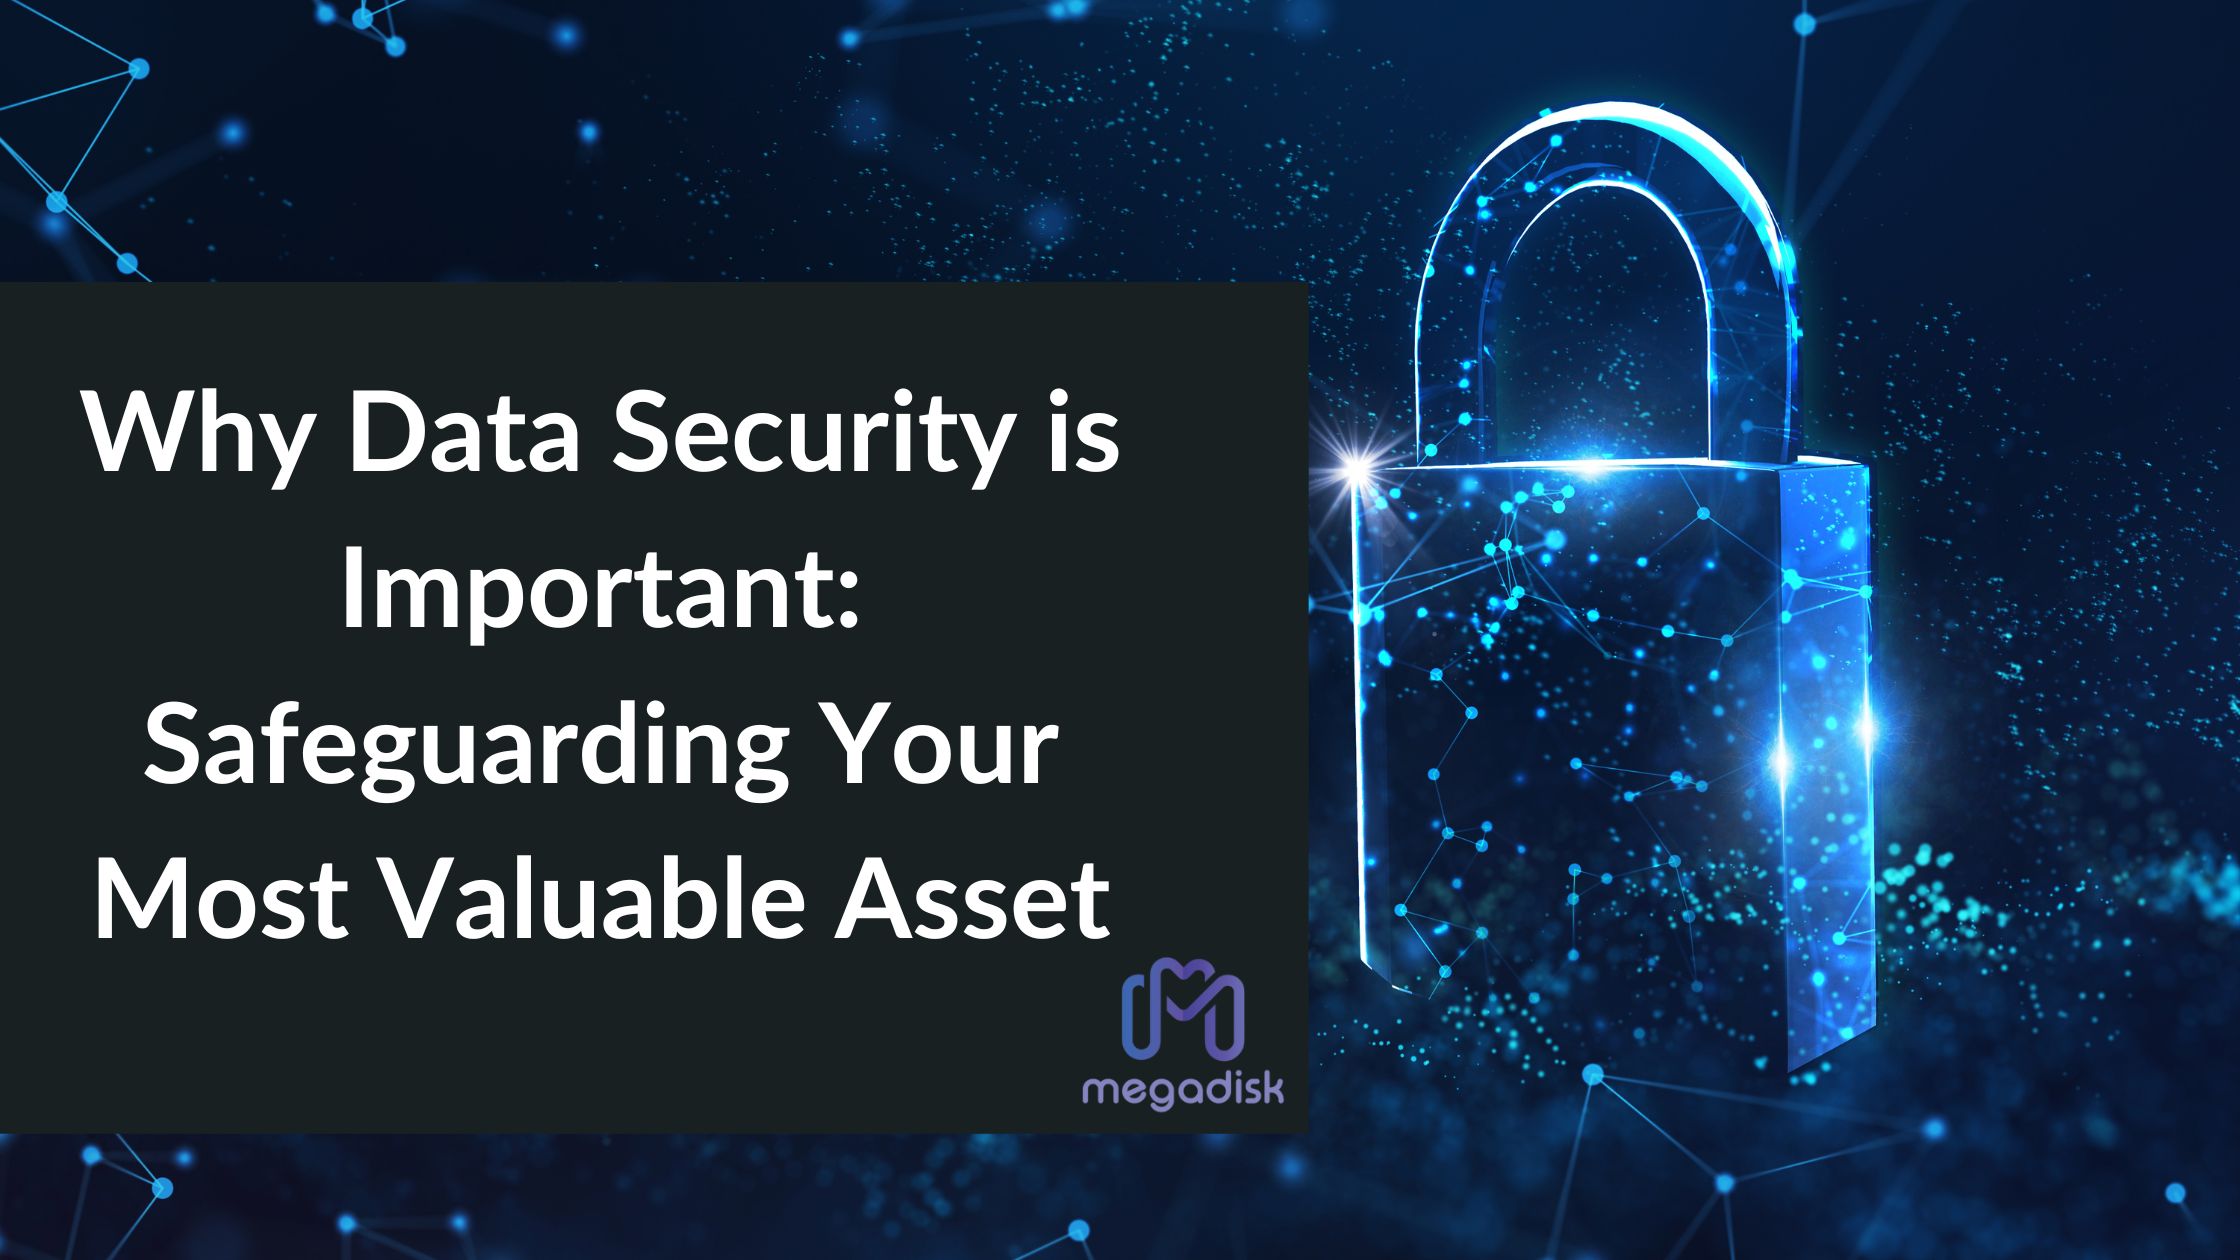 Why Data Security is Important: Safeguarding Your Most Valuable Asset